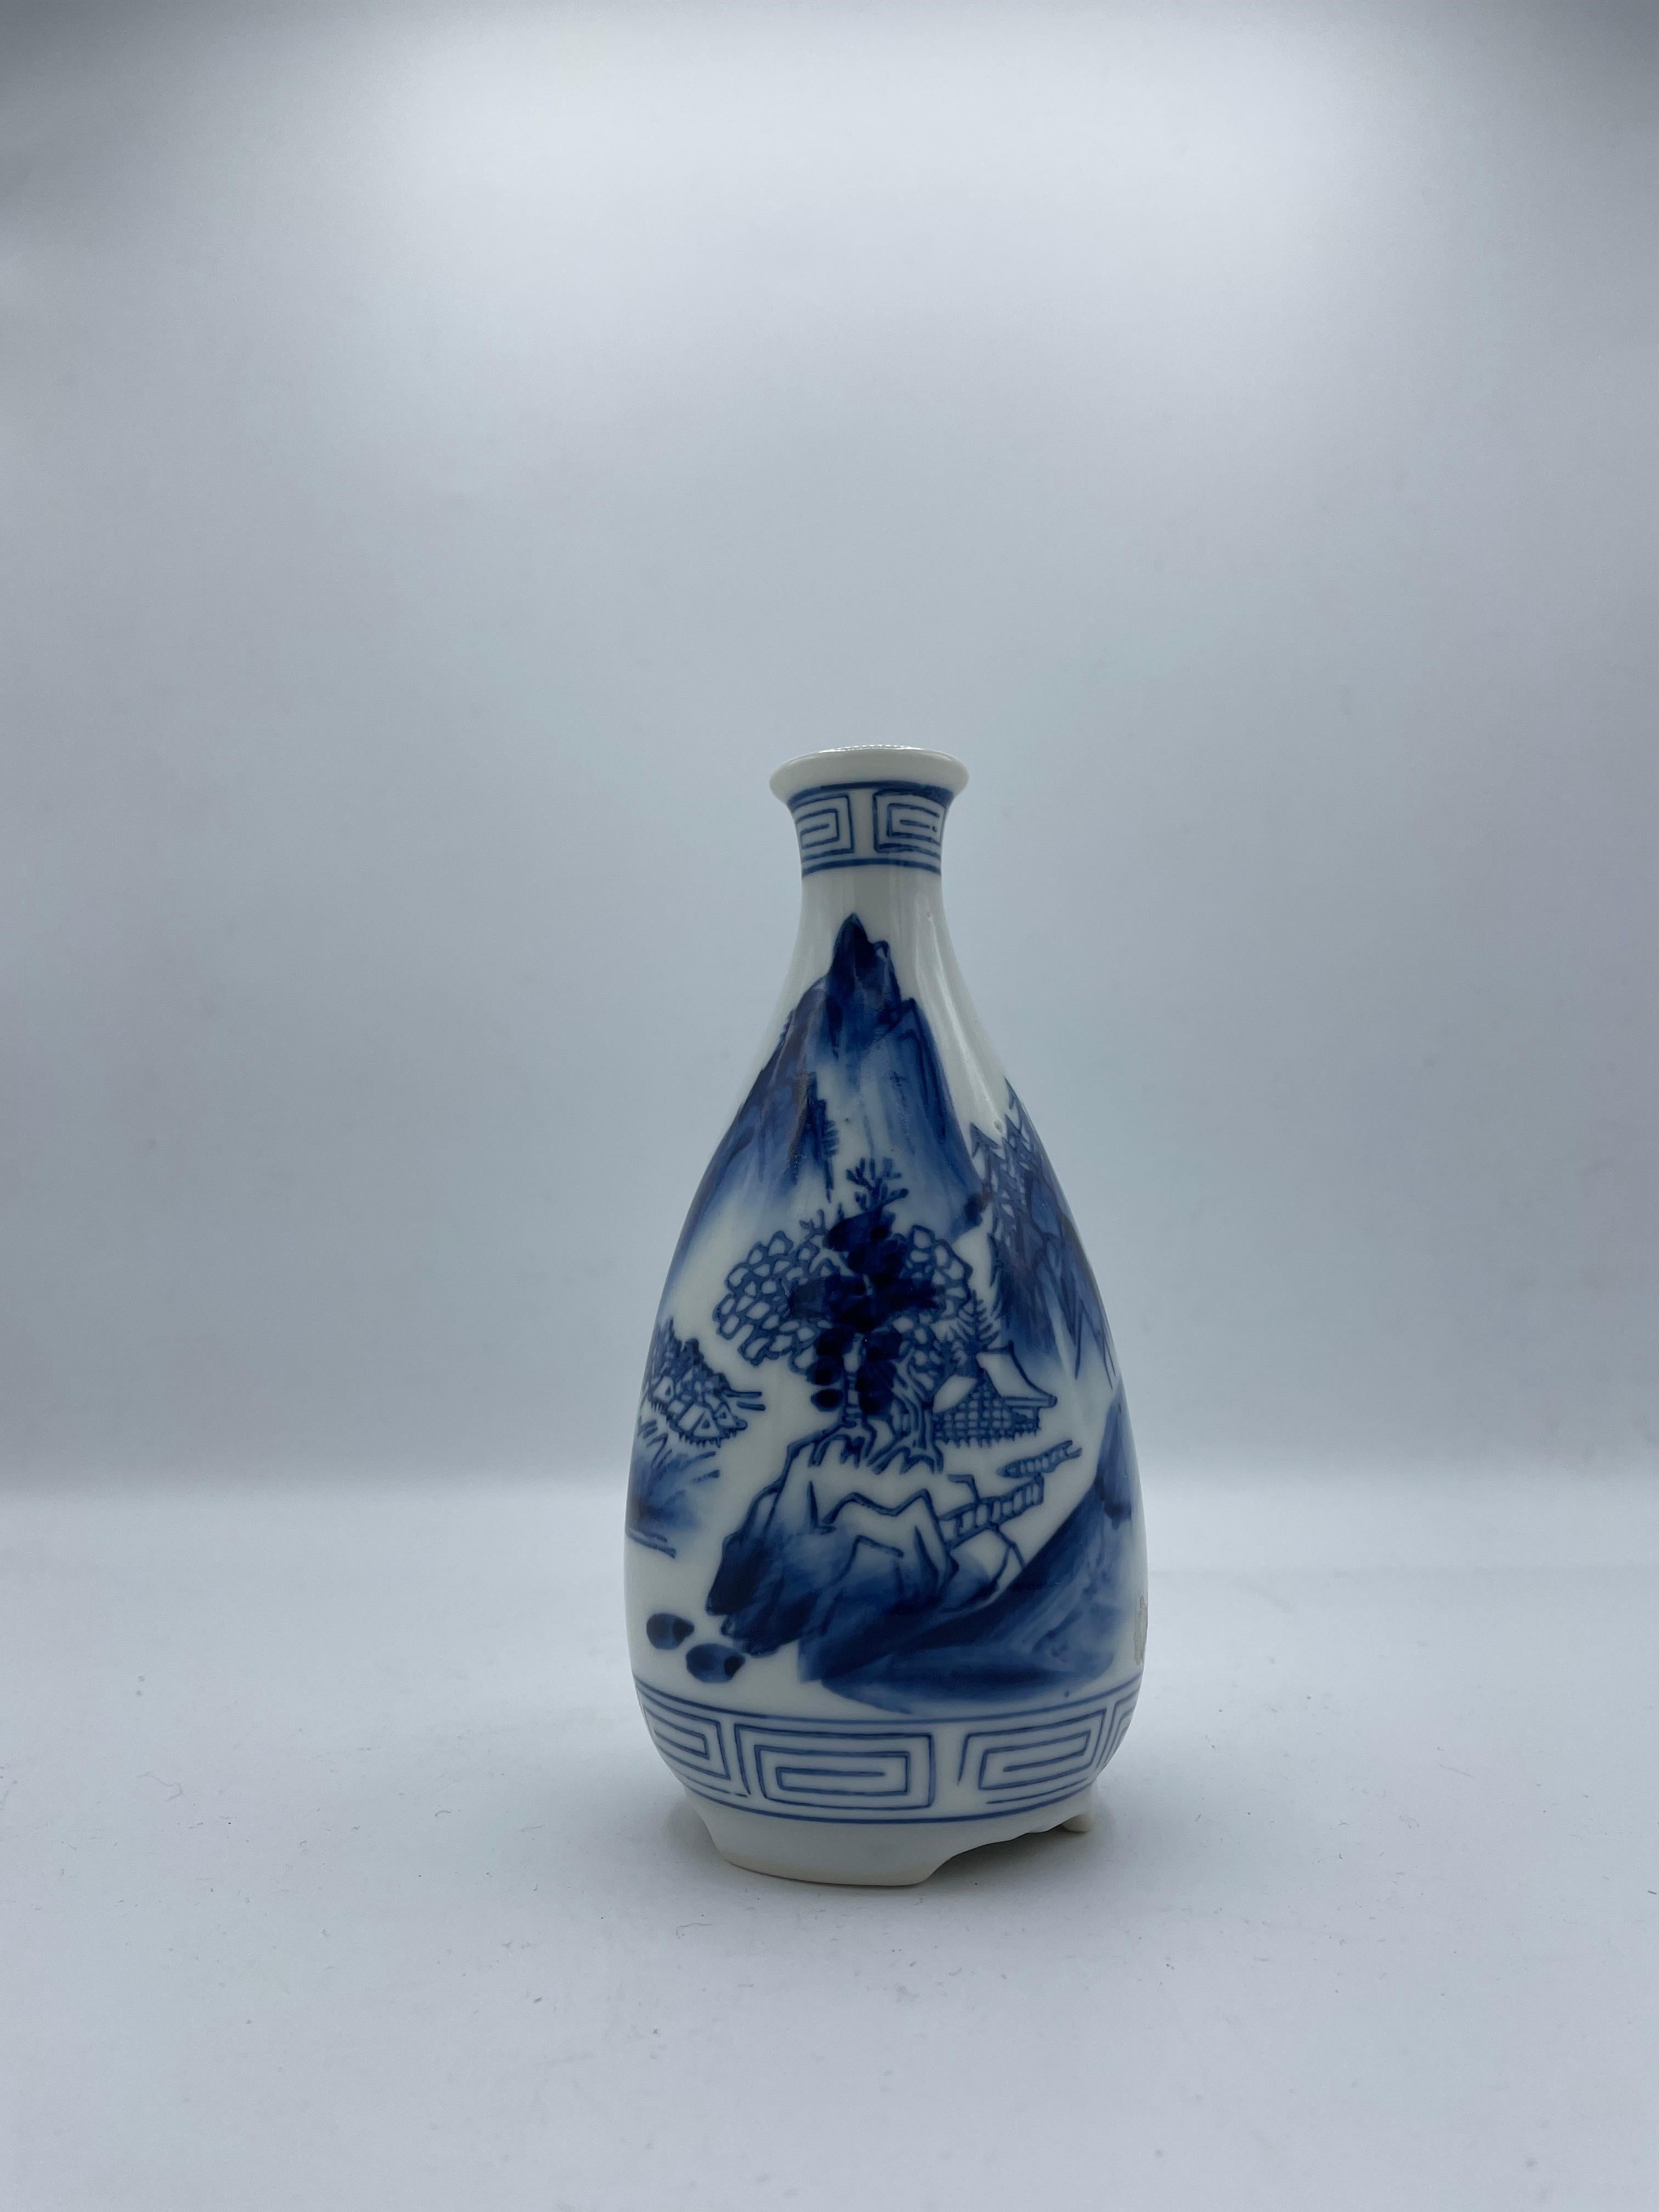 This is a sake bottle which is called 'tokkuri' in Japanese.
This tokkuri is made with porcelain and it is hand painted.
It was made in Showa era around 1940s.
The design is the landscape of Japanese mountain and the house.

Dimensions:
5 x 5 x H15